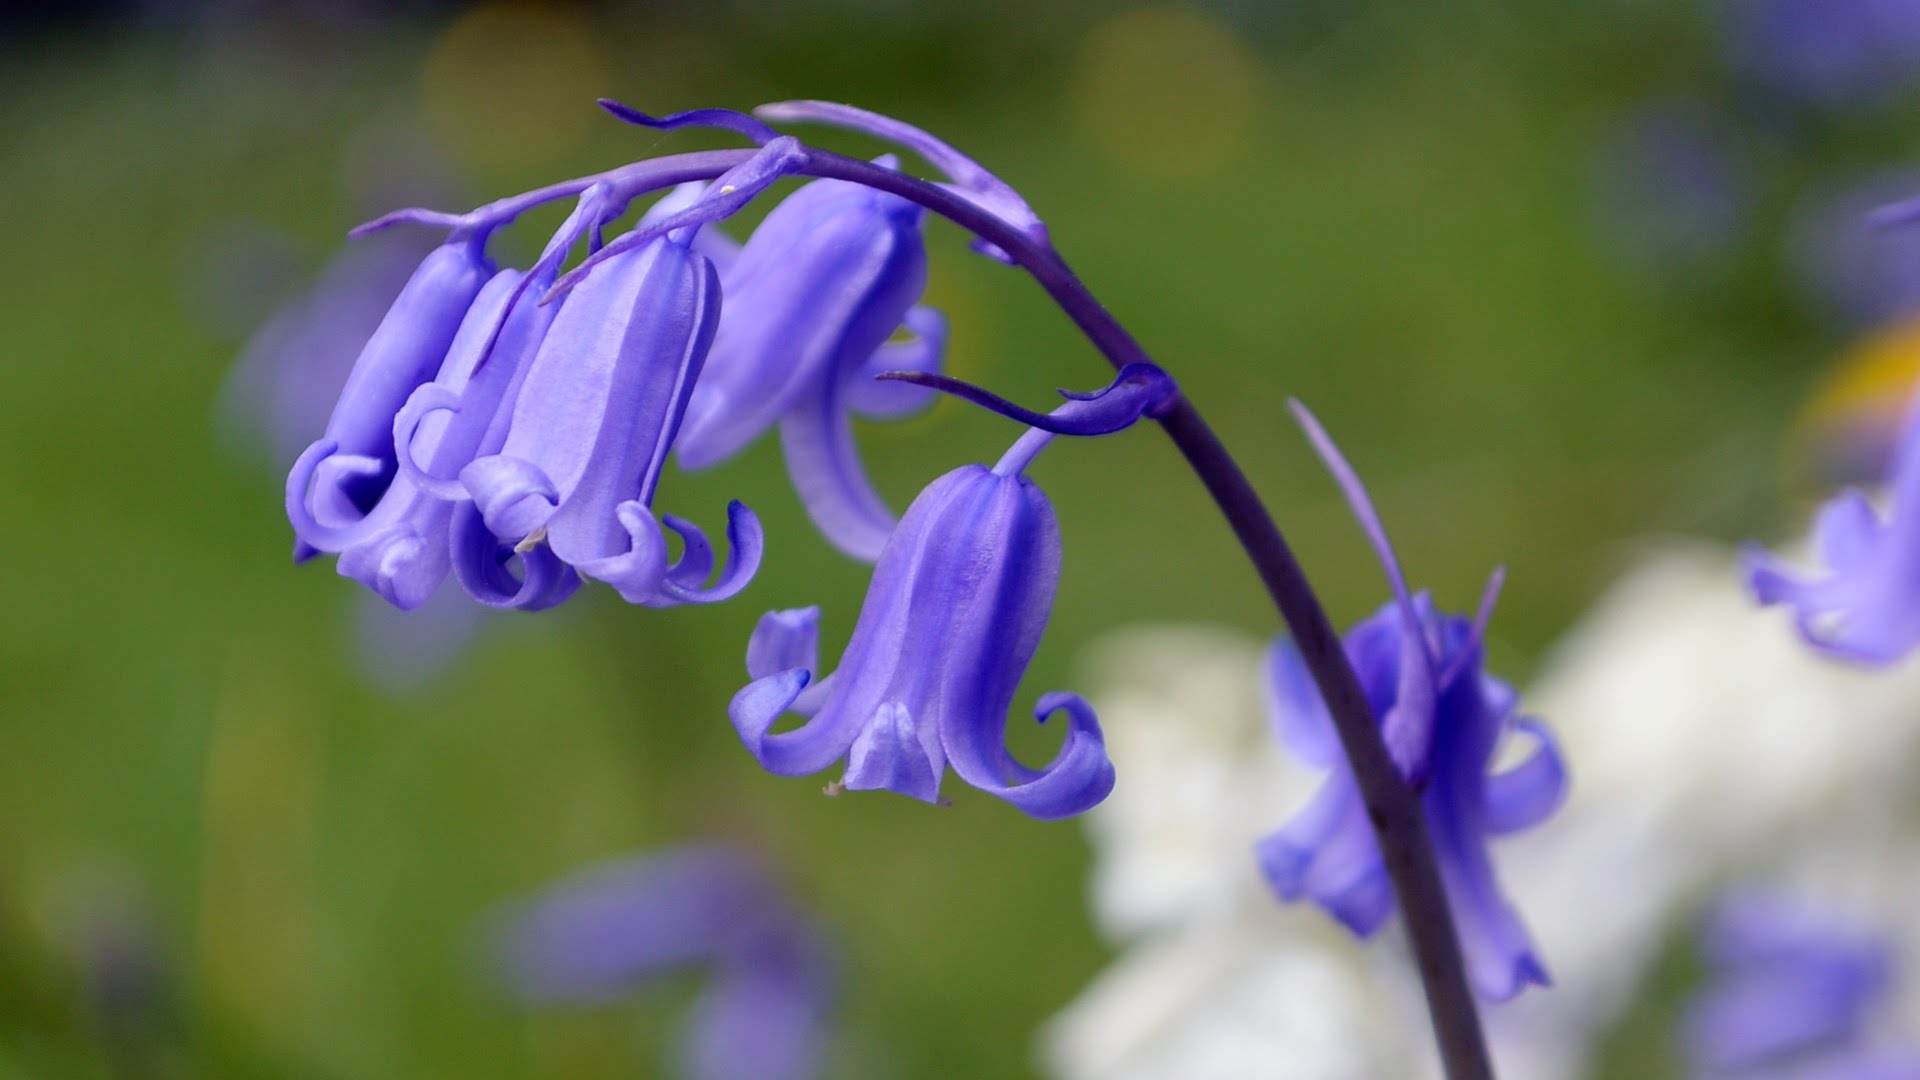 Bluebells, the Flower of May - YouTube